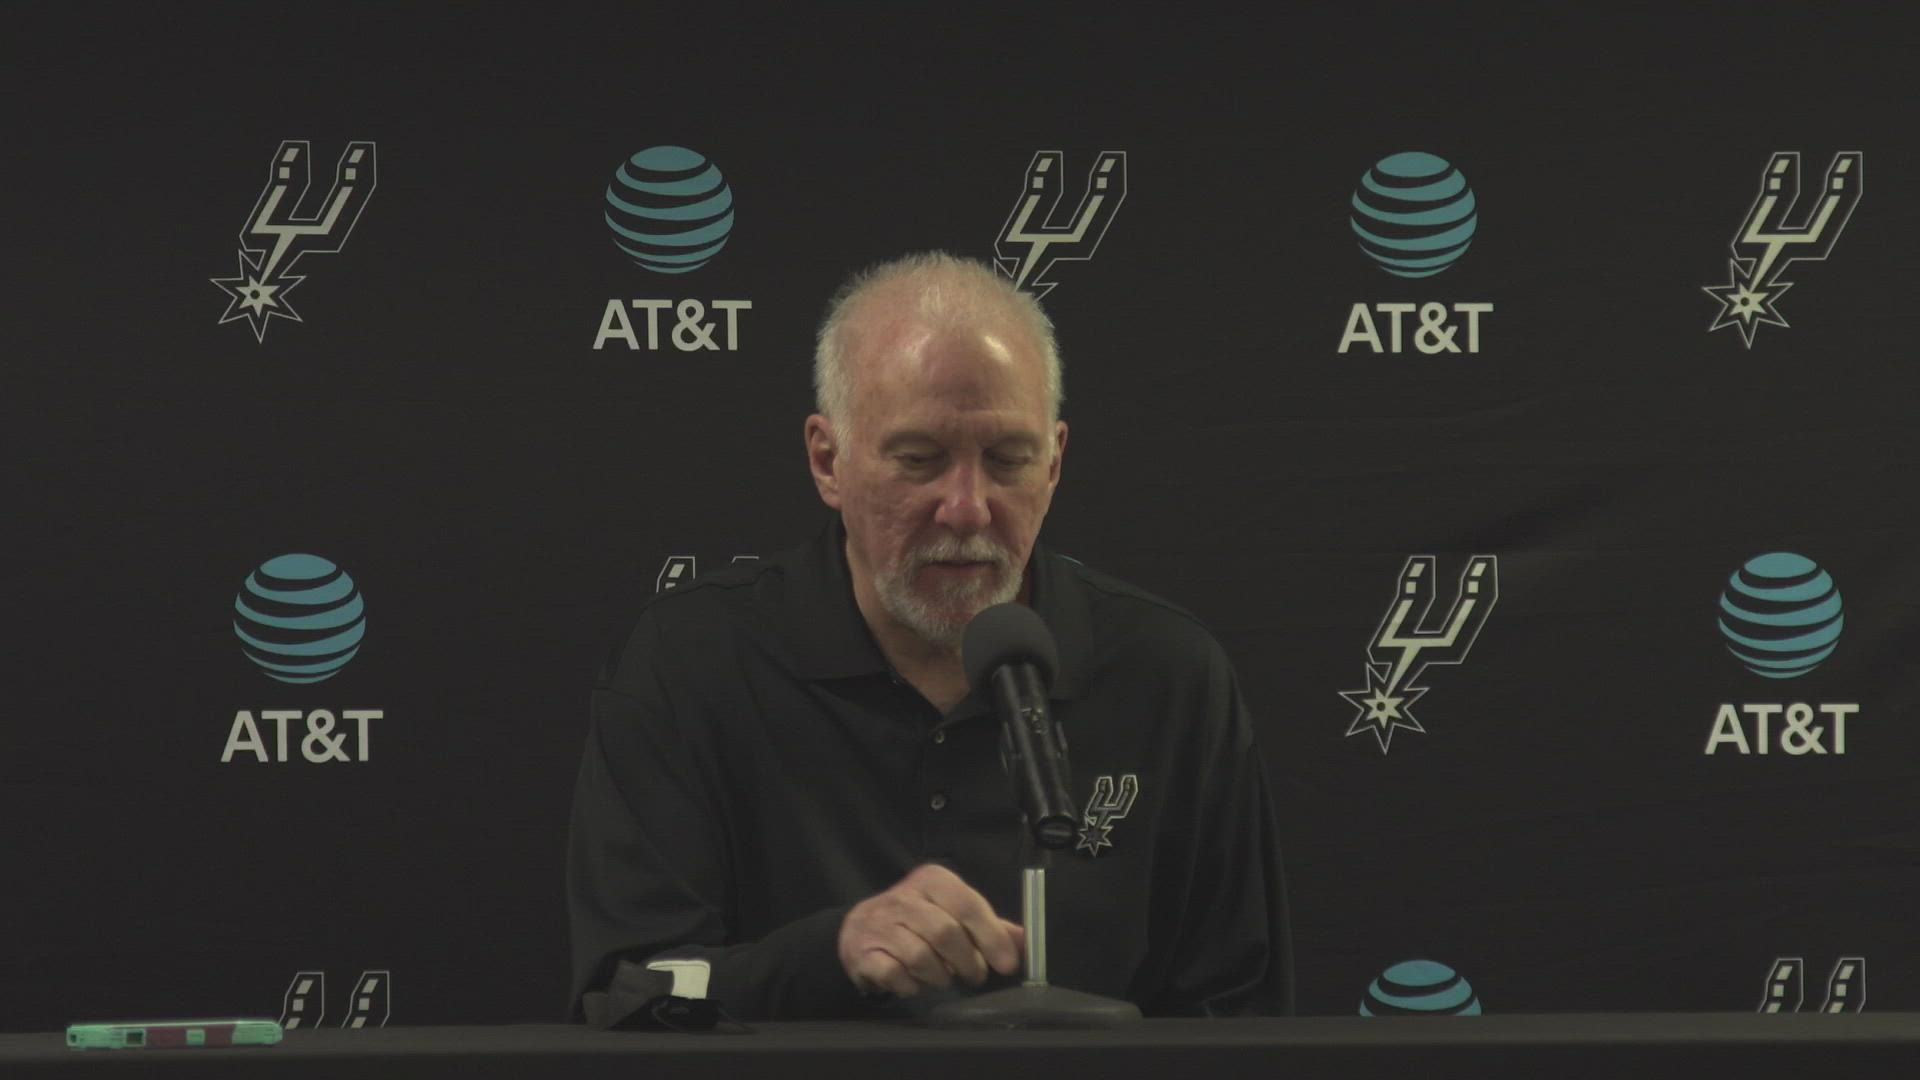 Popovich complimented Forbes and wished him well, said that Hernangomez is a solid vet, and said that Josh Primo will continue to develop in the G League.